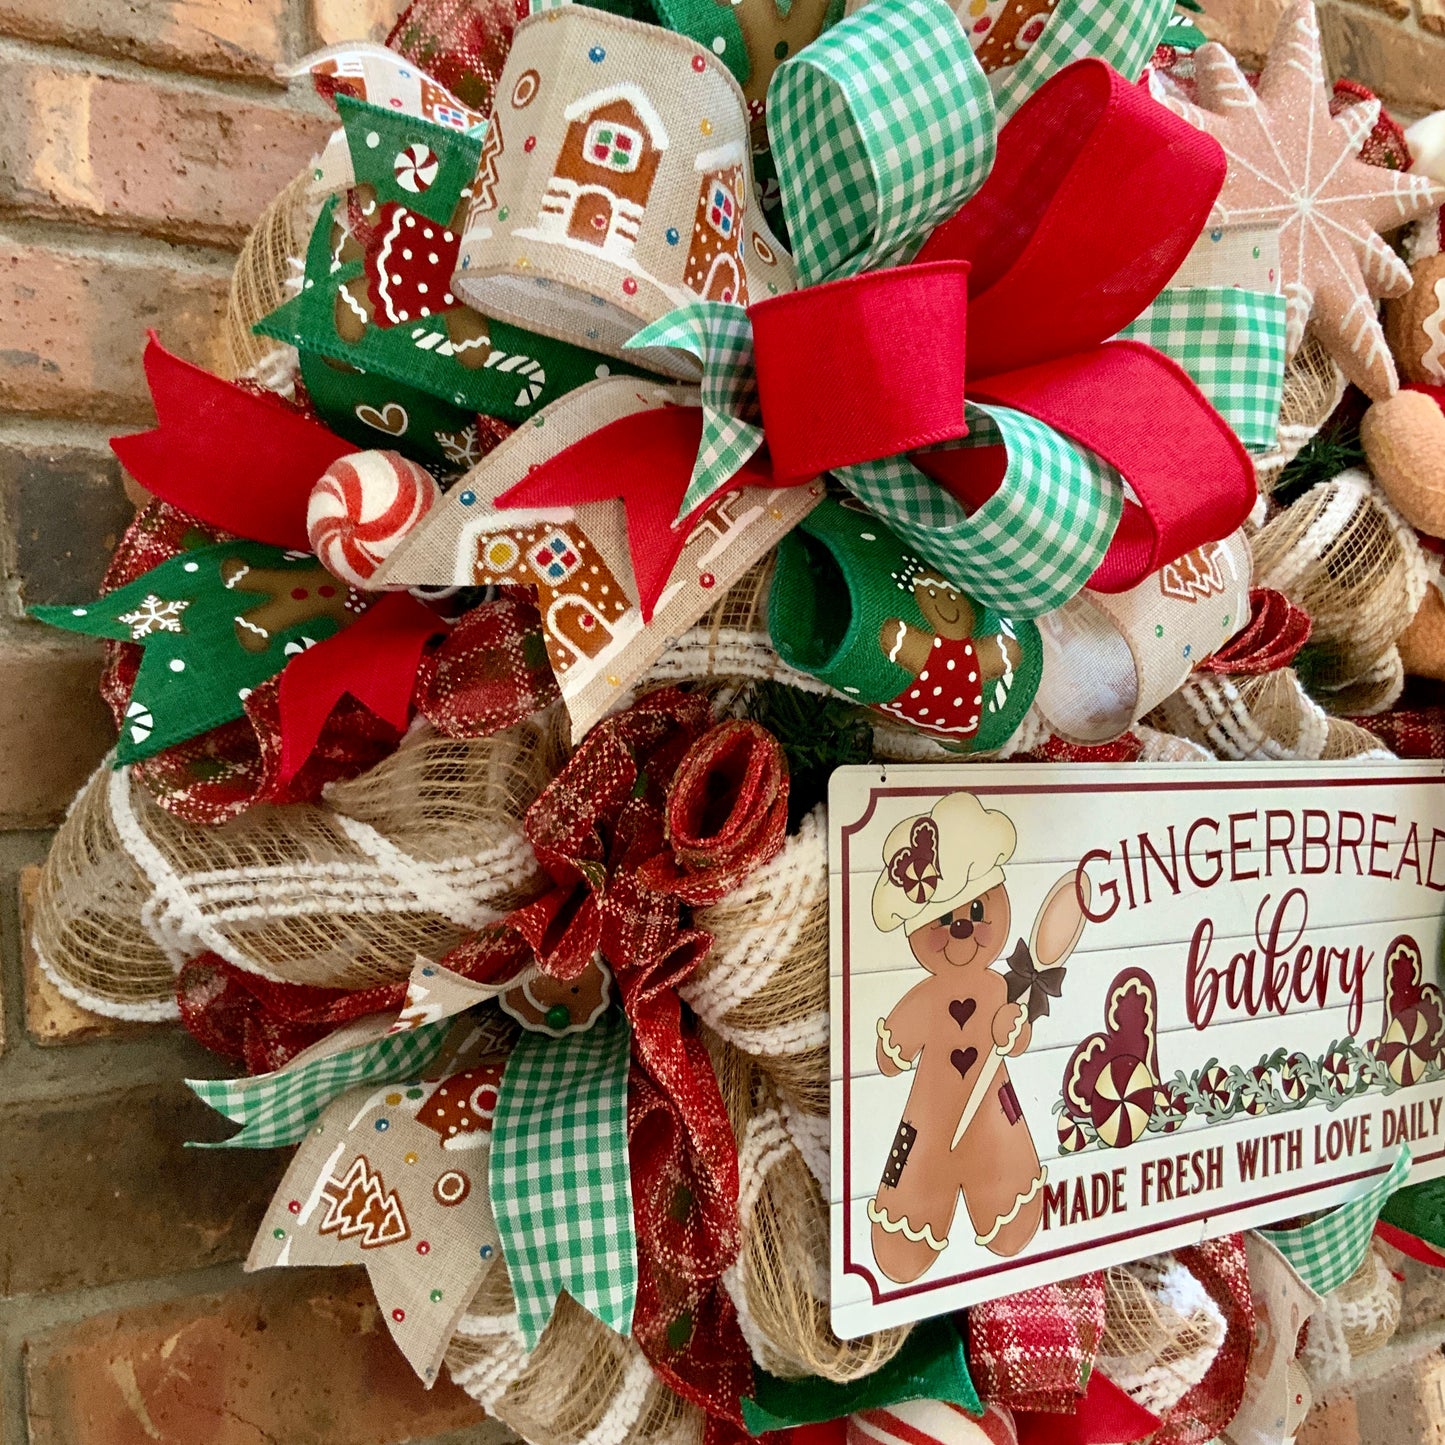 Gingerbread Wreath. Gingerbread Christmas Wreath, Gingerbread Man Wreath, Gingerbread Christmas Decor, Christmas Wreath For Front Door